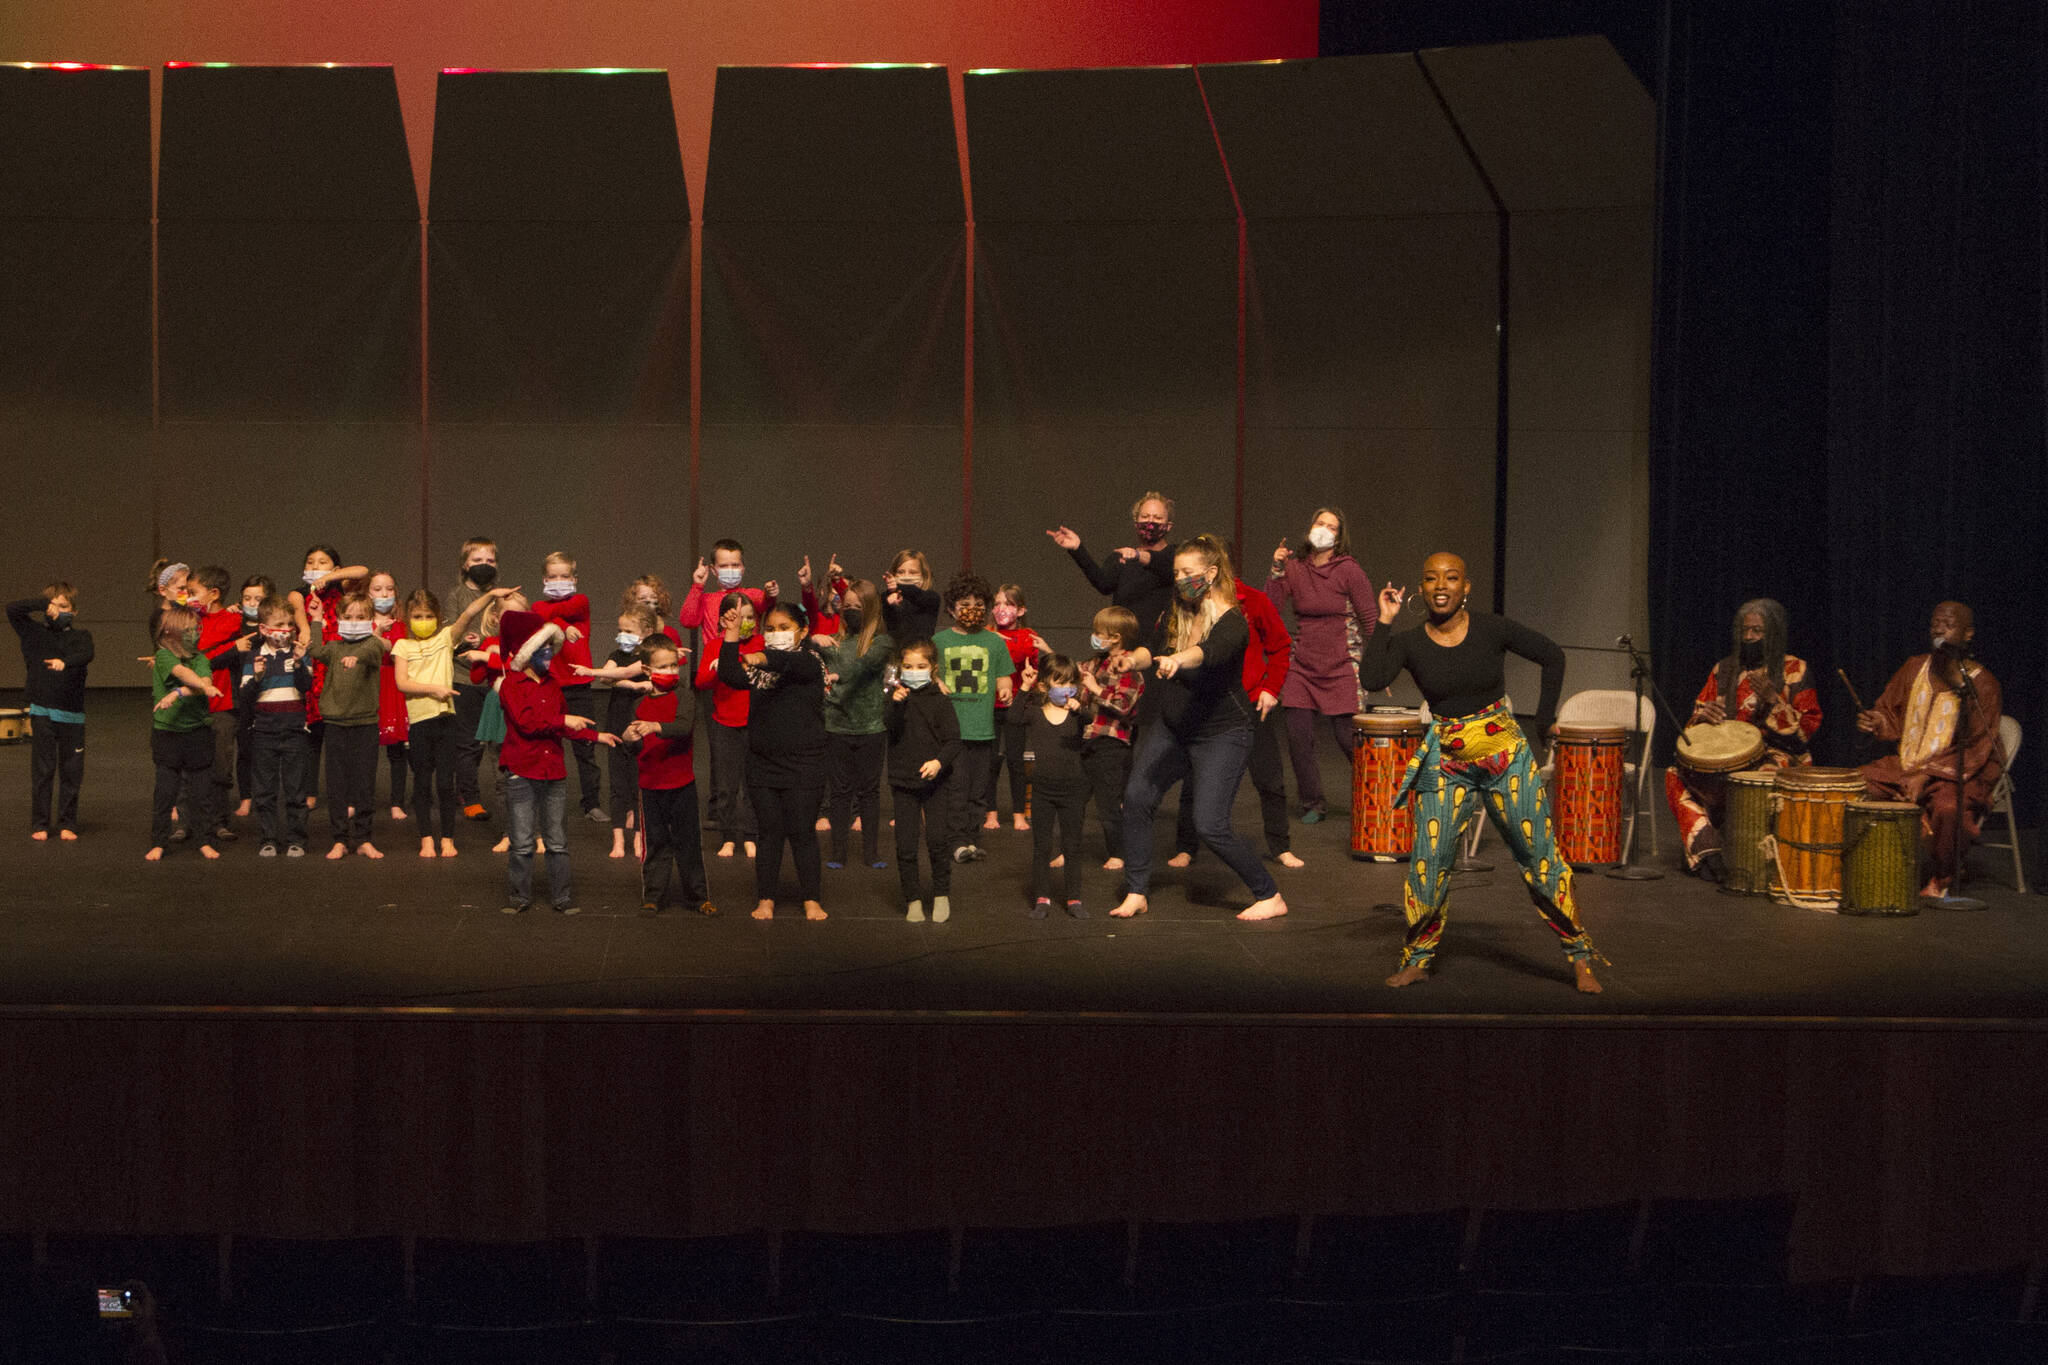 Little Fireweed students sing their welcome song during the Sankofa Dance Theater Alaska end of residency performance on Dec. 3. (Photo by Sarah Knapp/Homer News)